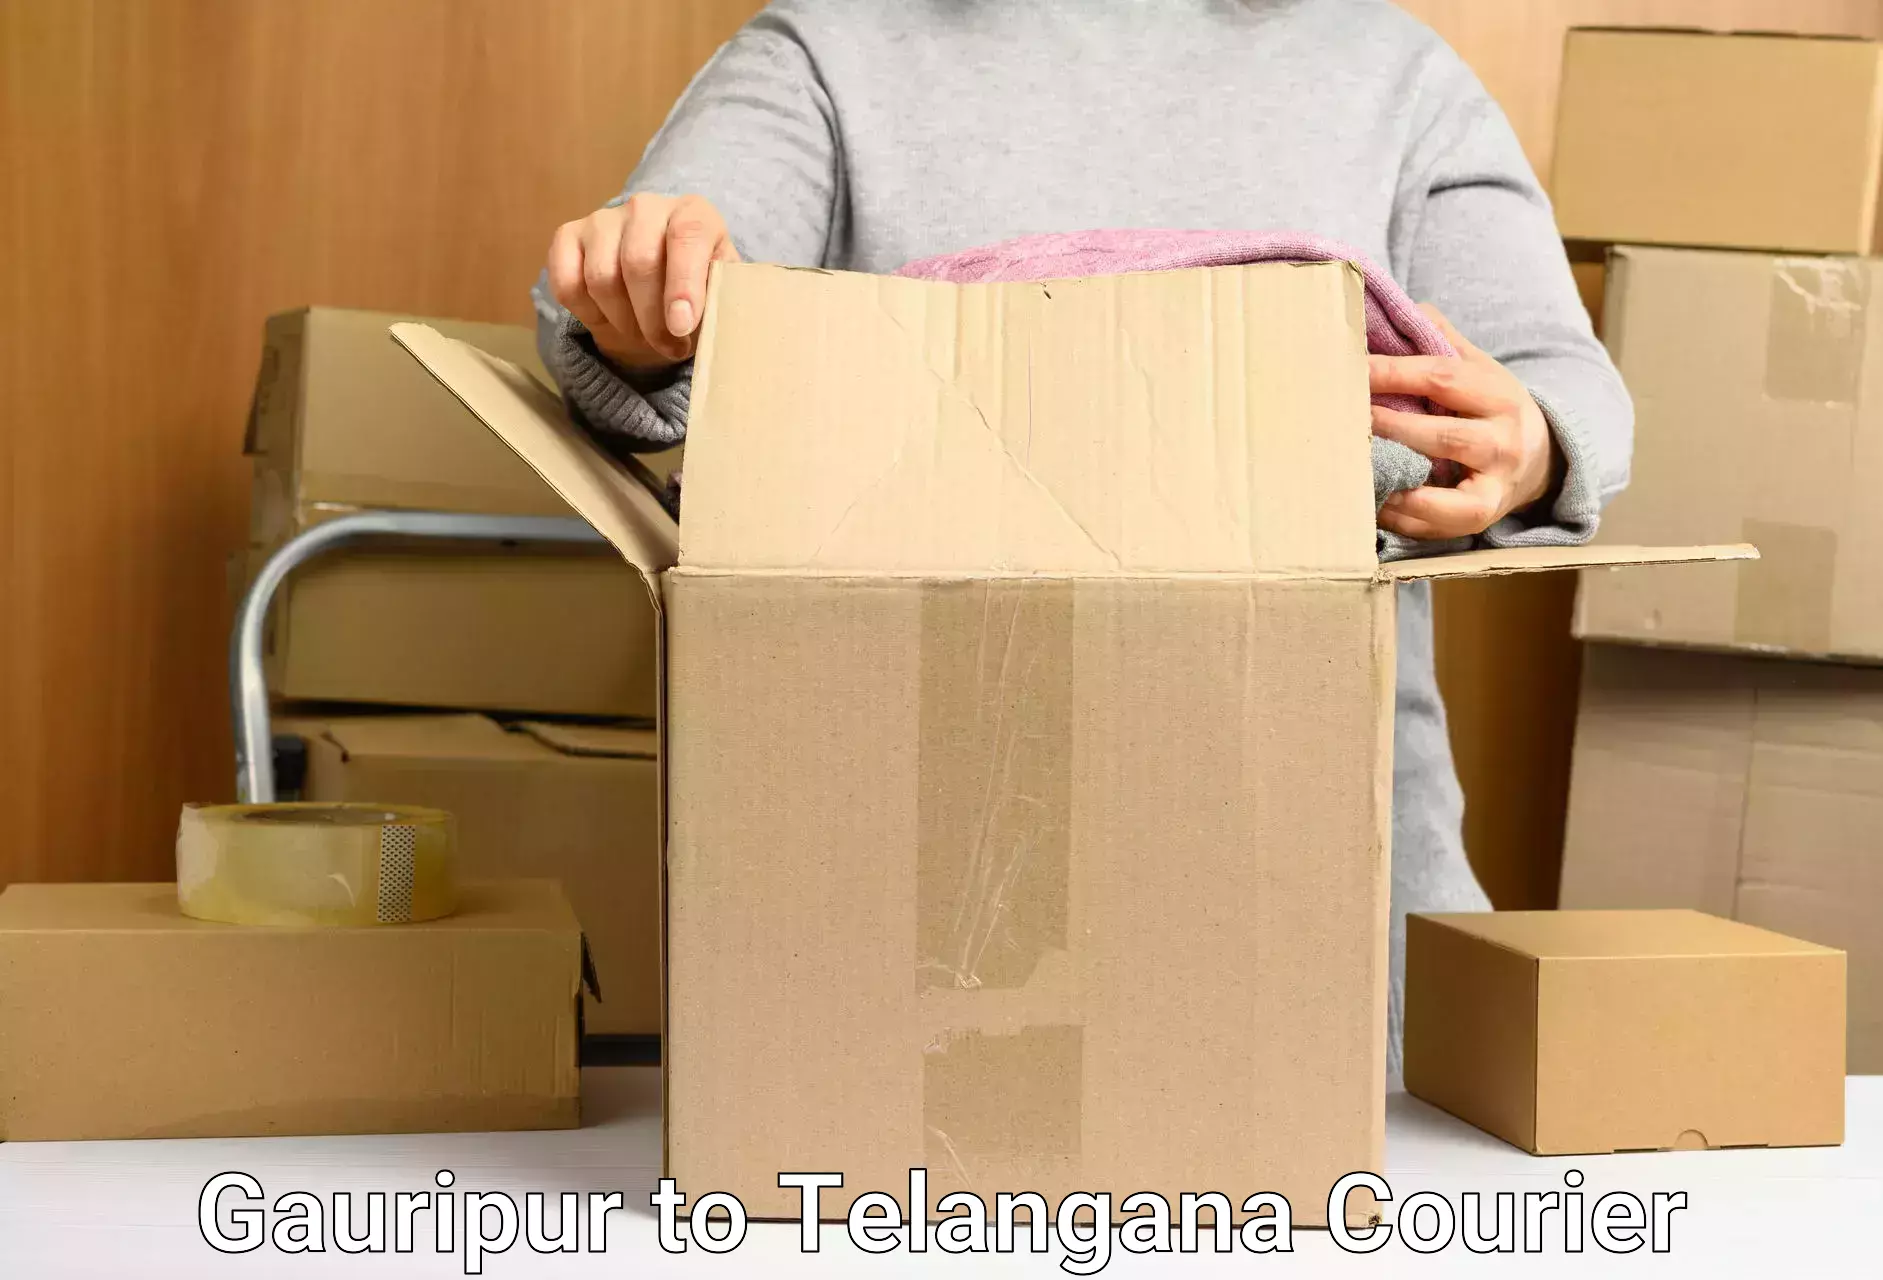 Same-day delivery solutions Gauripur to Warangal